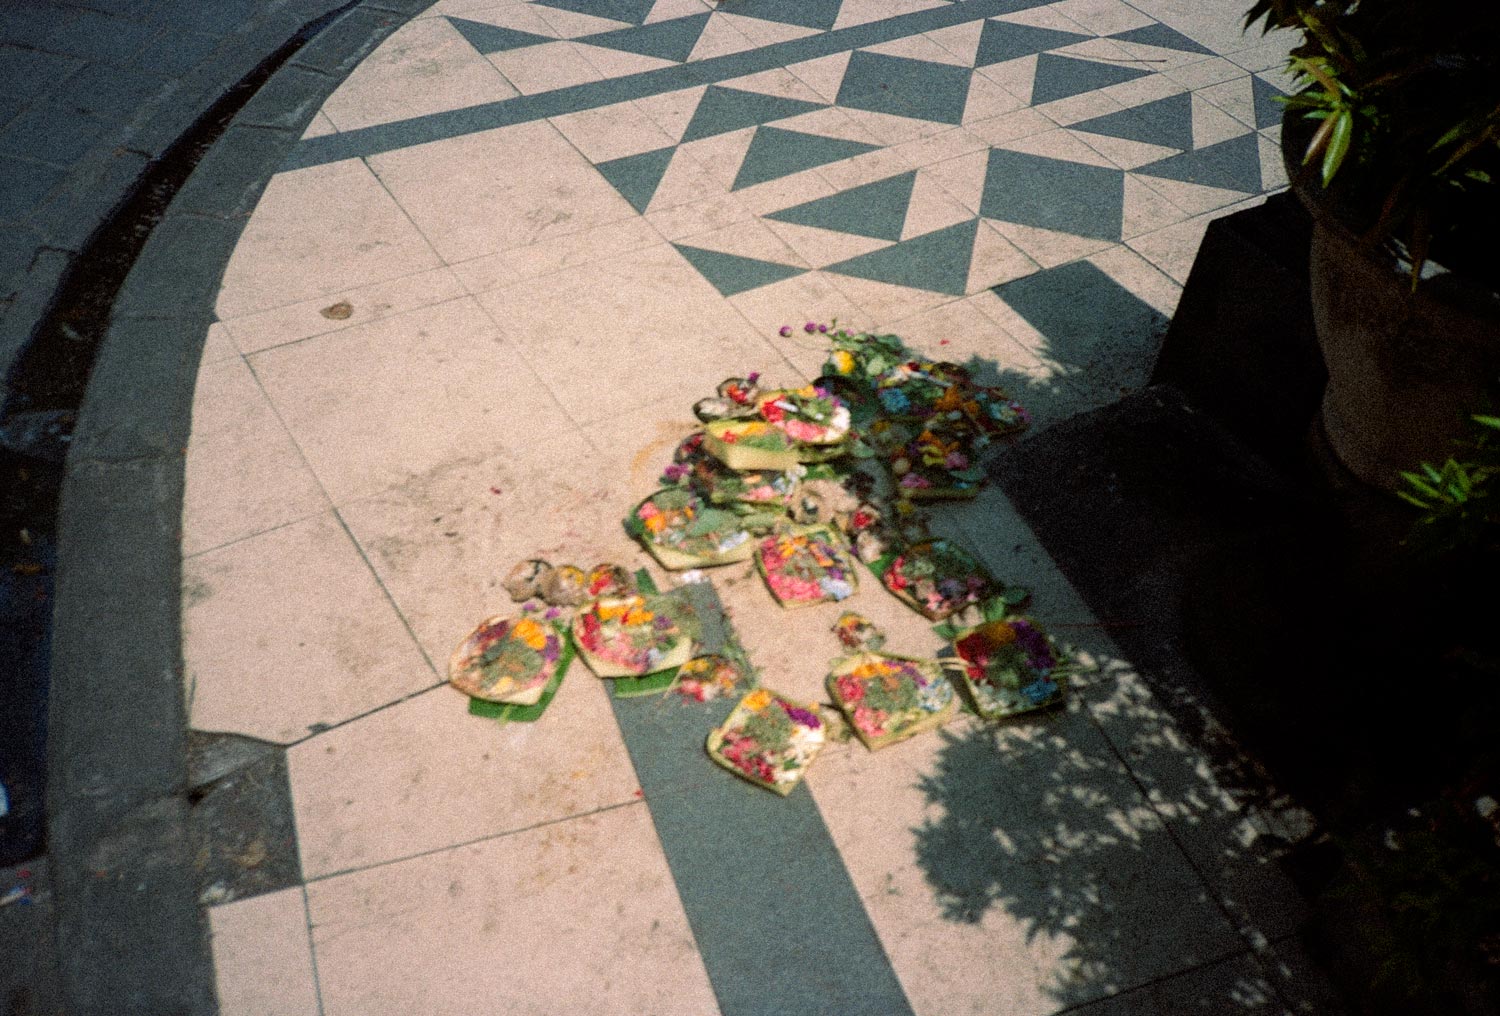 Canang Sari Offerings on the street.